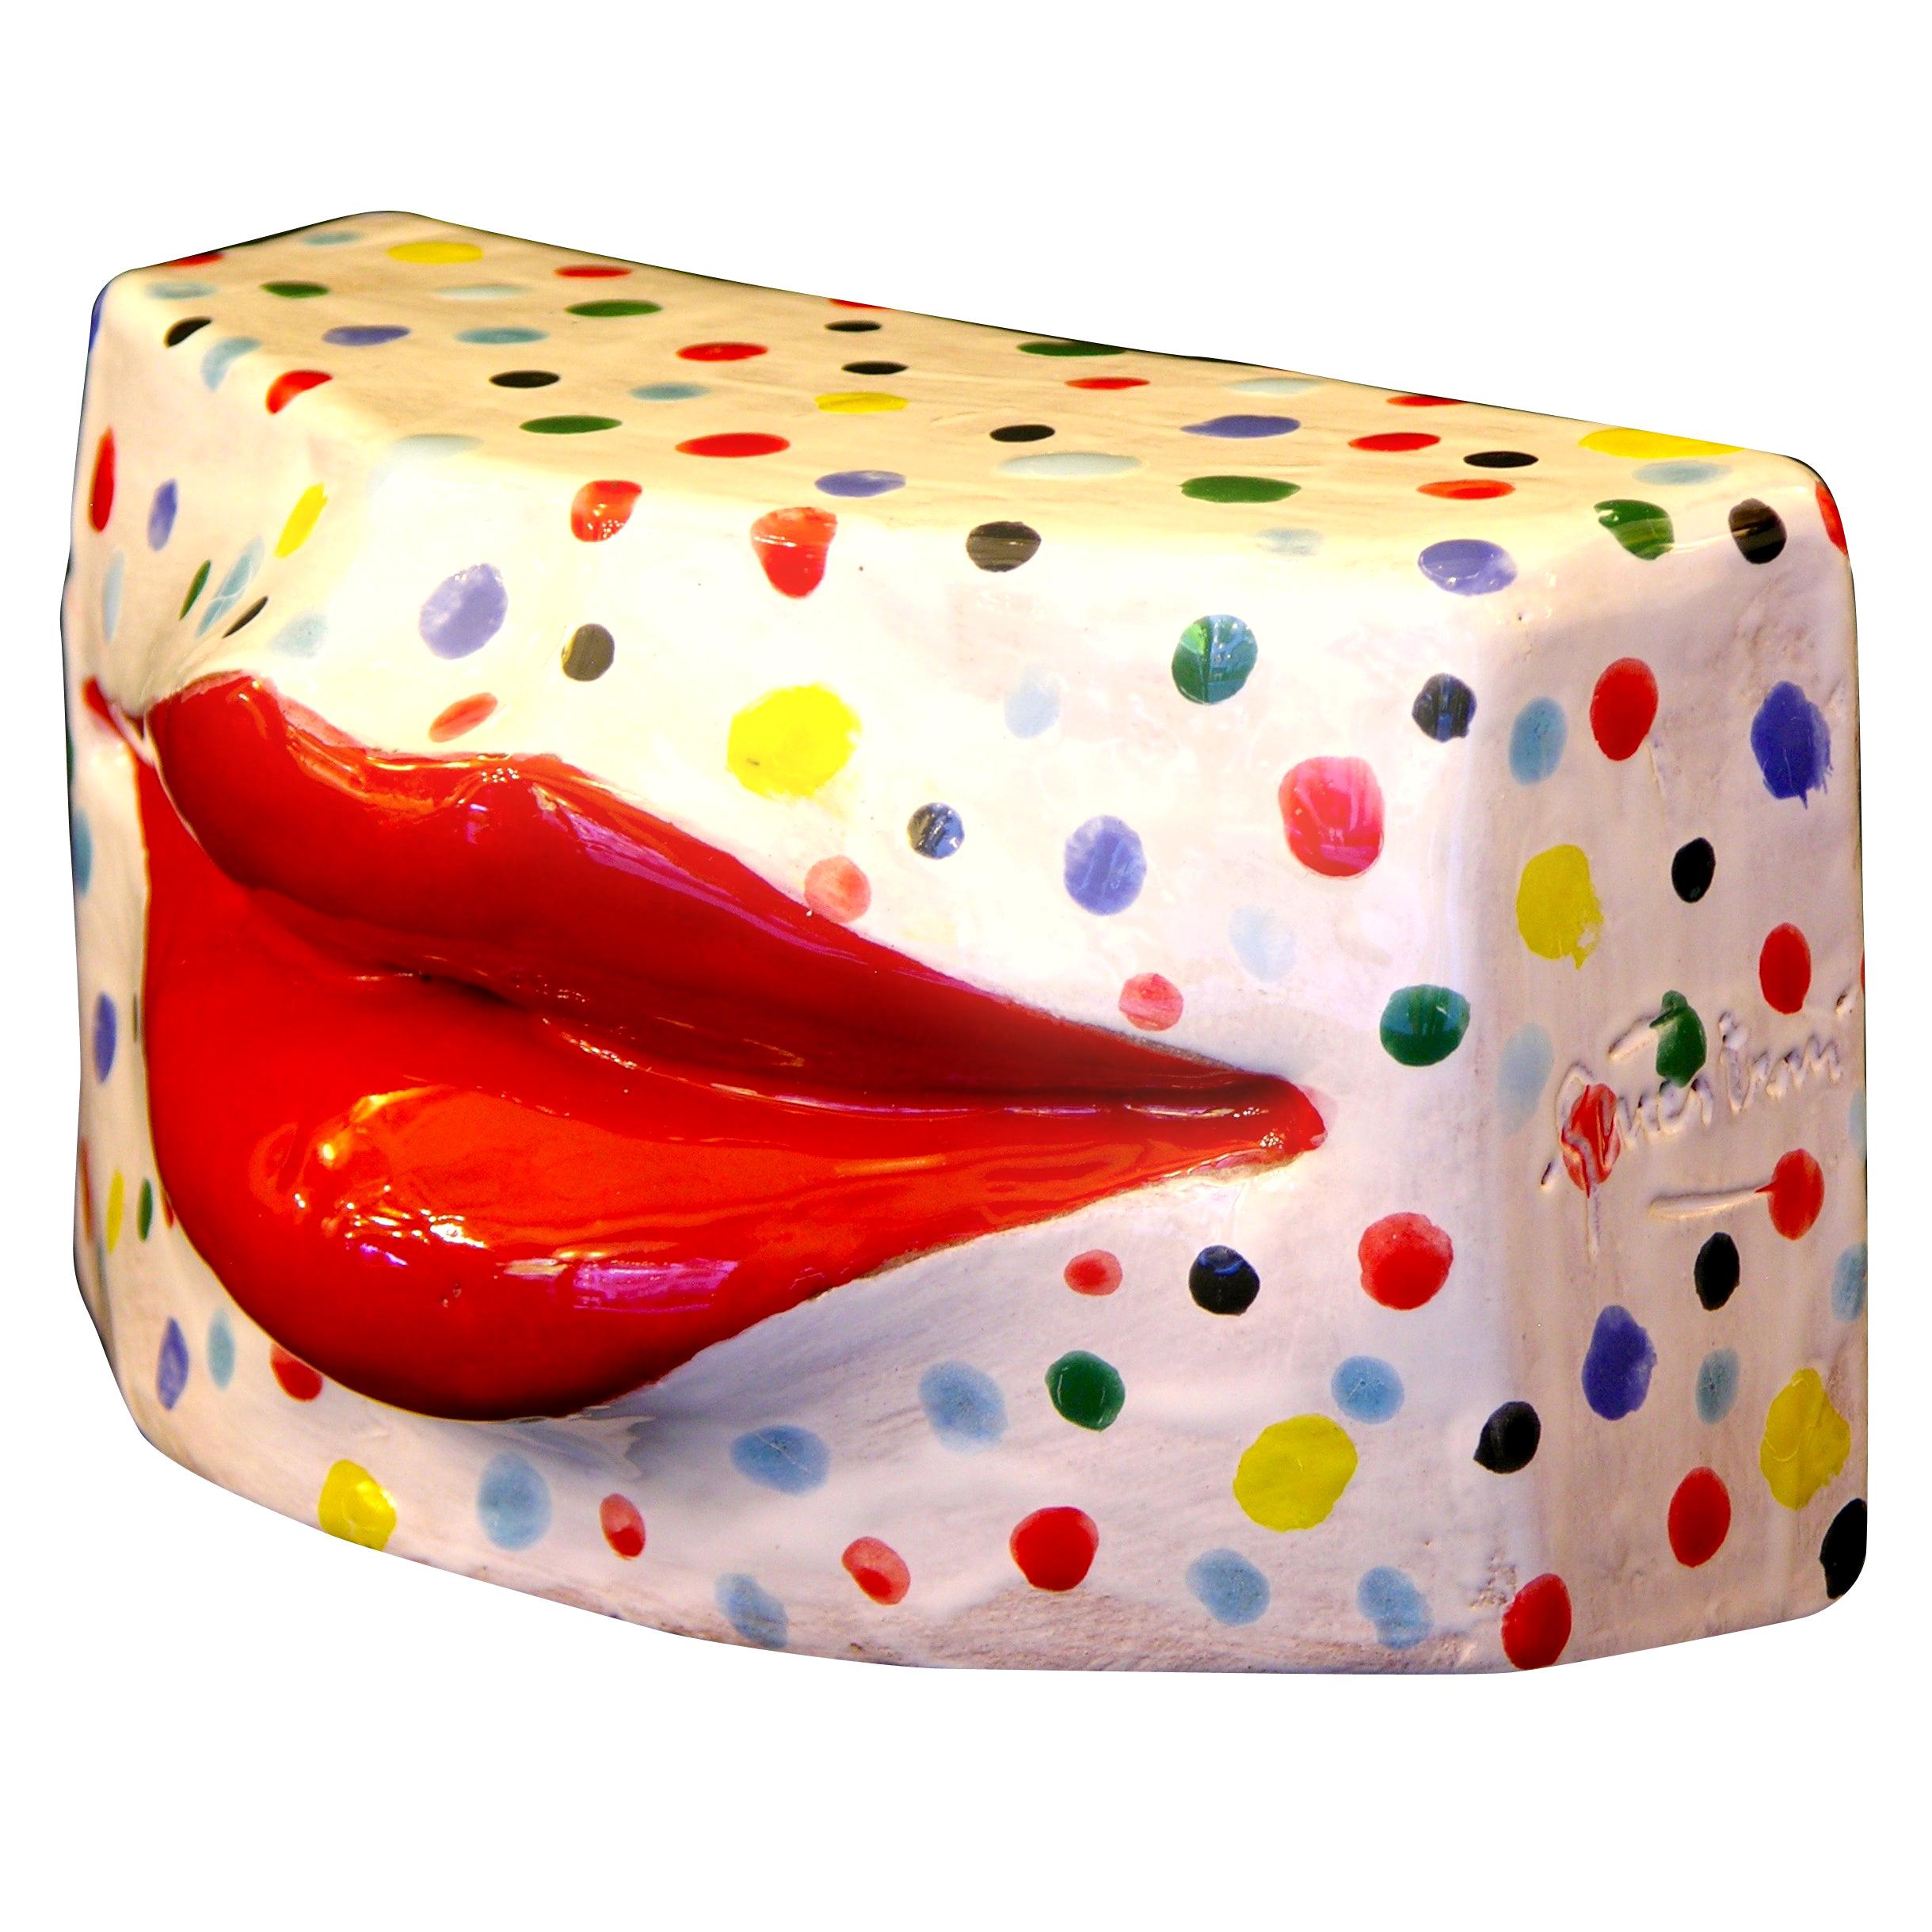 Lipstick Red Lips Modern Terracotta Kiss Sculpture with Multicolor Dots on White